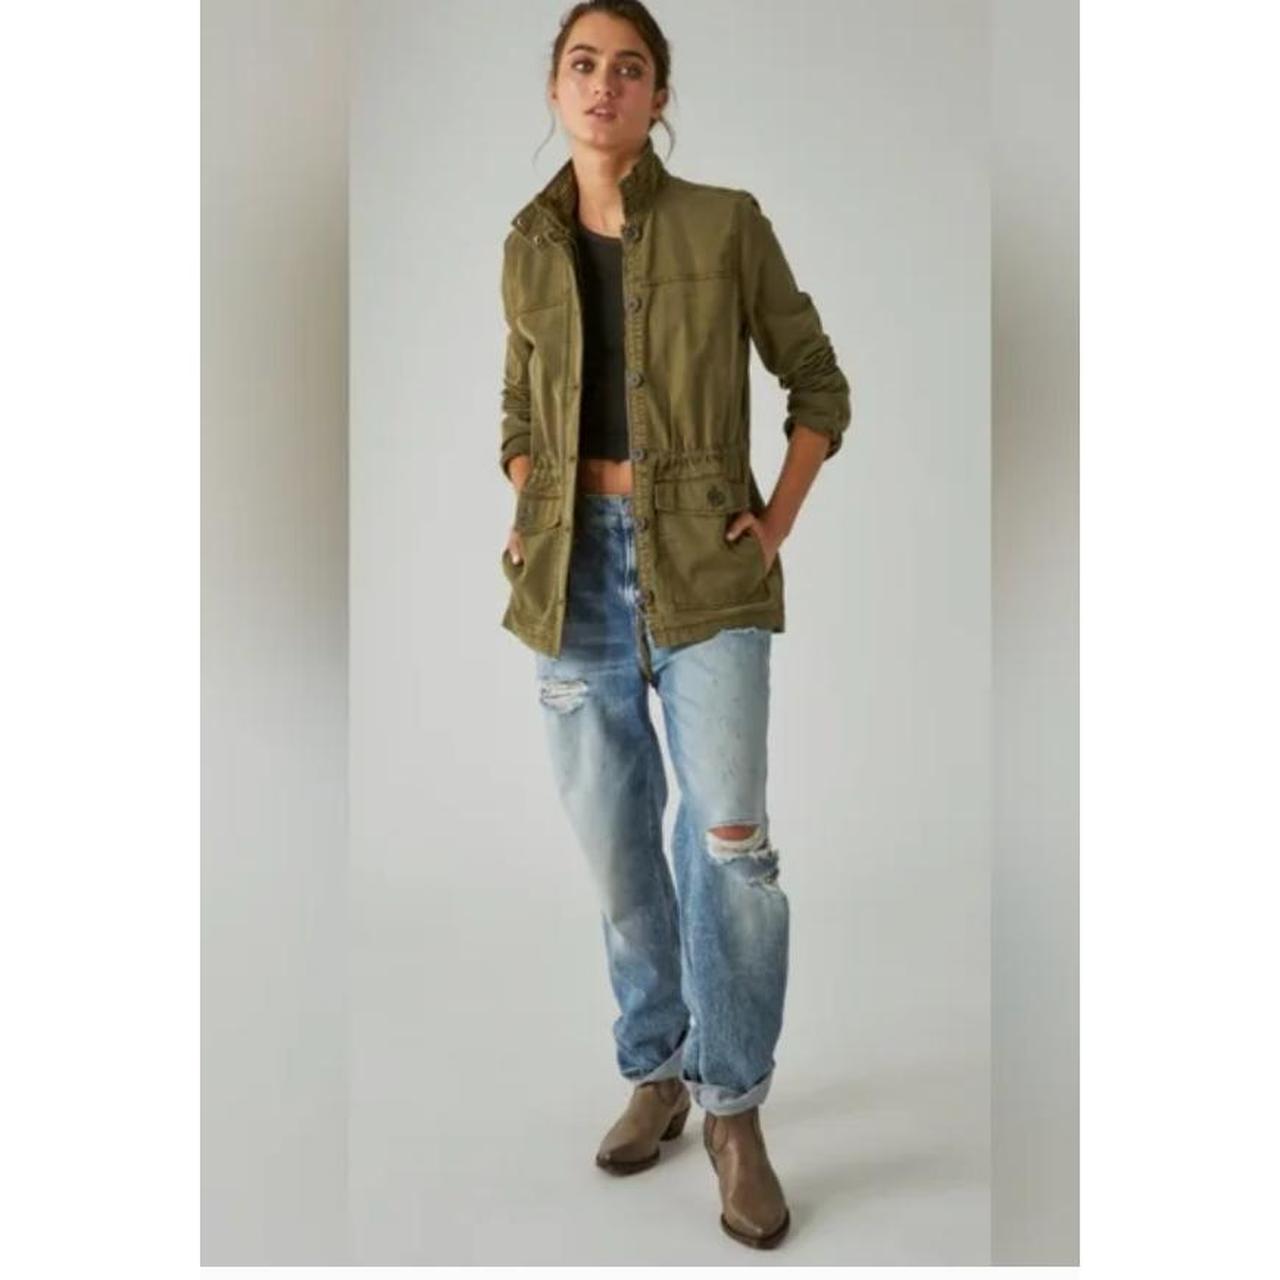 Lucky Brand Olive Green Utility Jacket with Waist - Depop